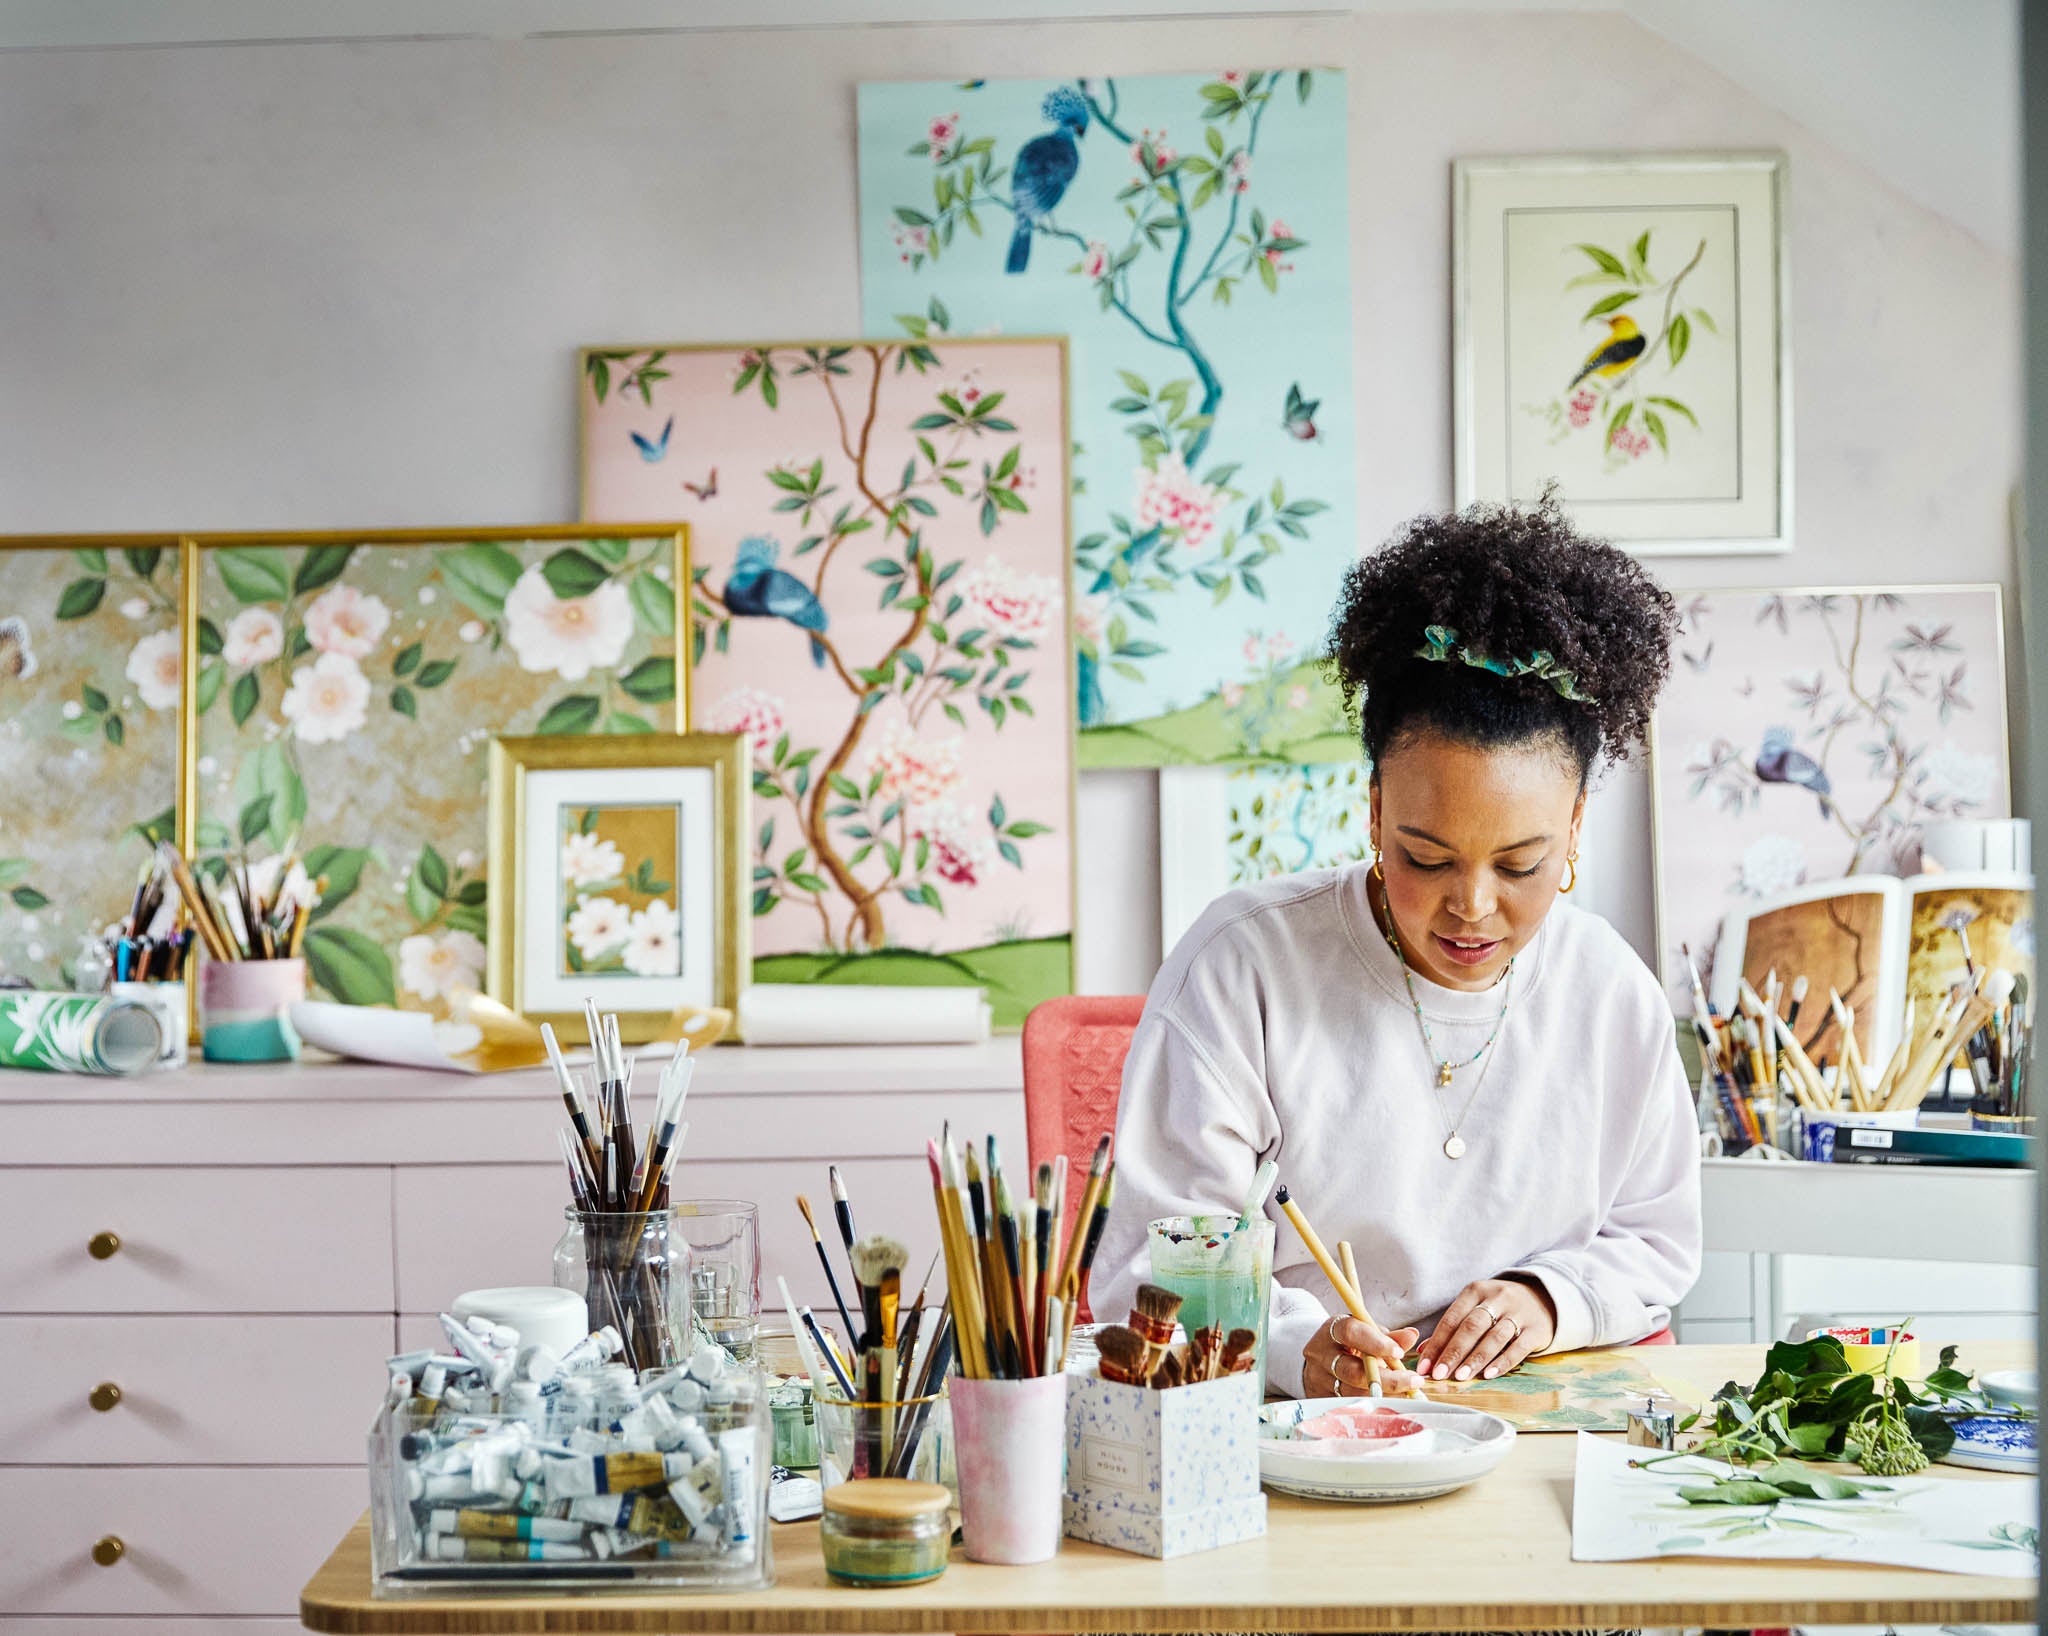 diane hill in chinoiserie art studio surrounded by original watercolor artworks and botanical and floral art prints